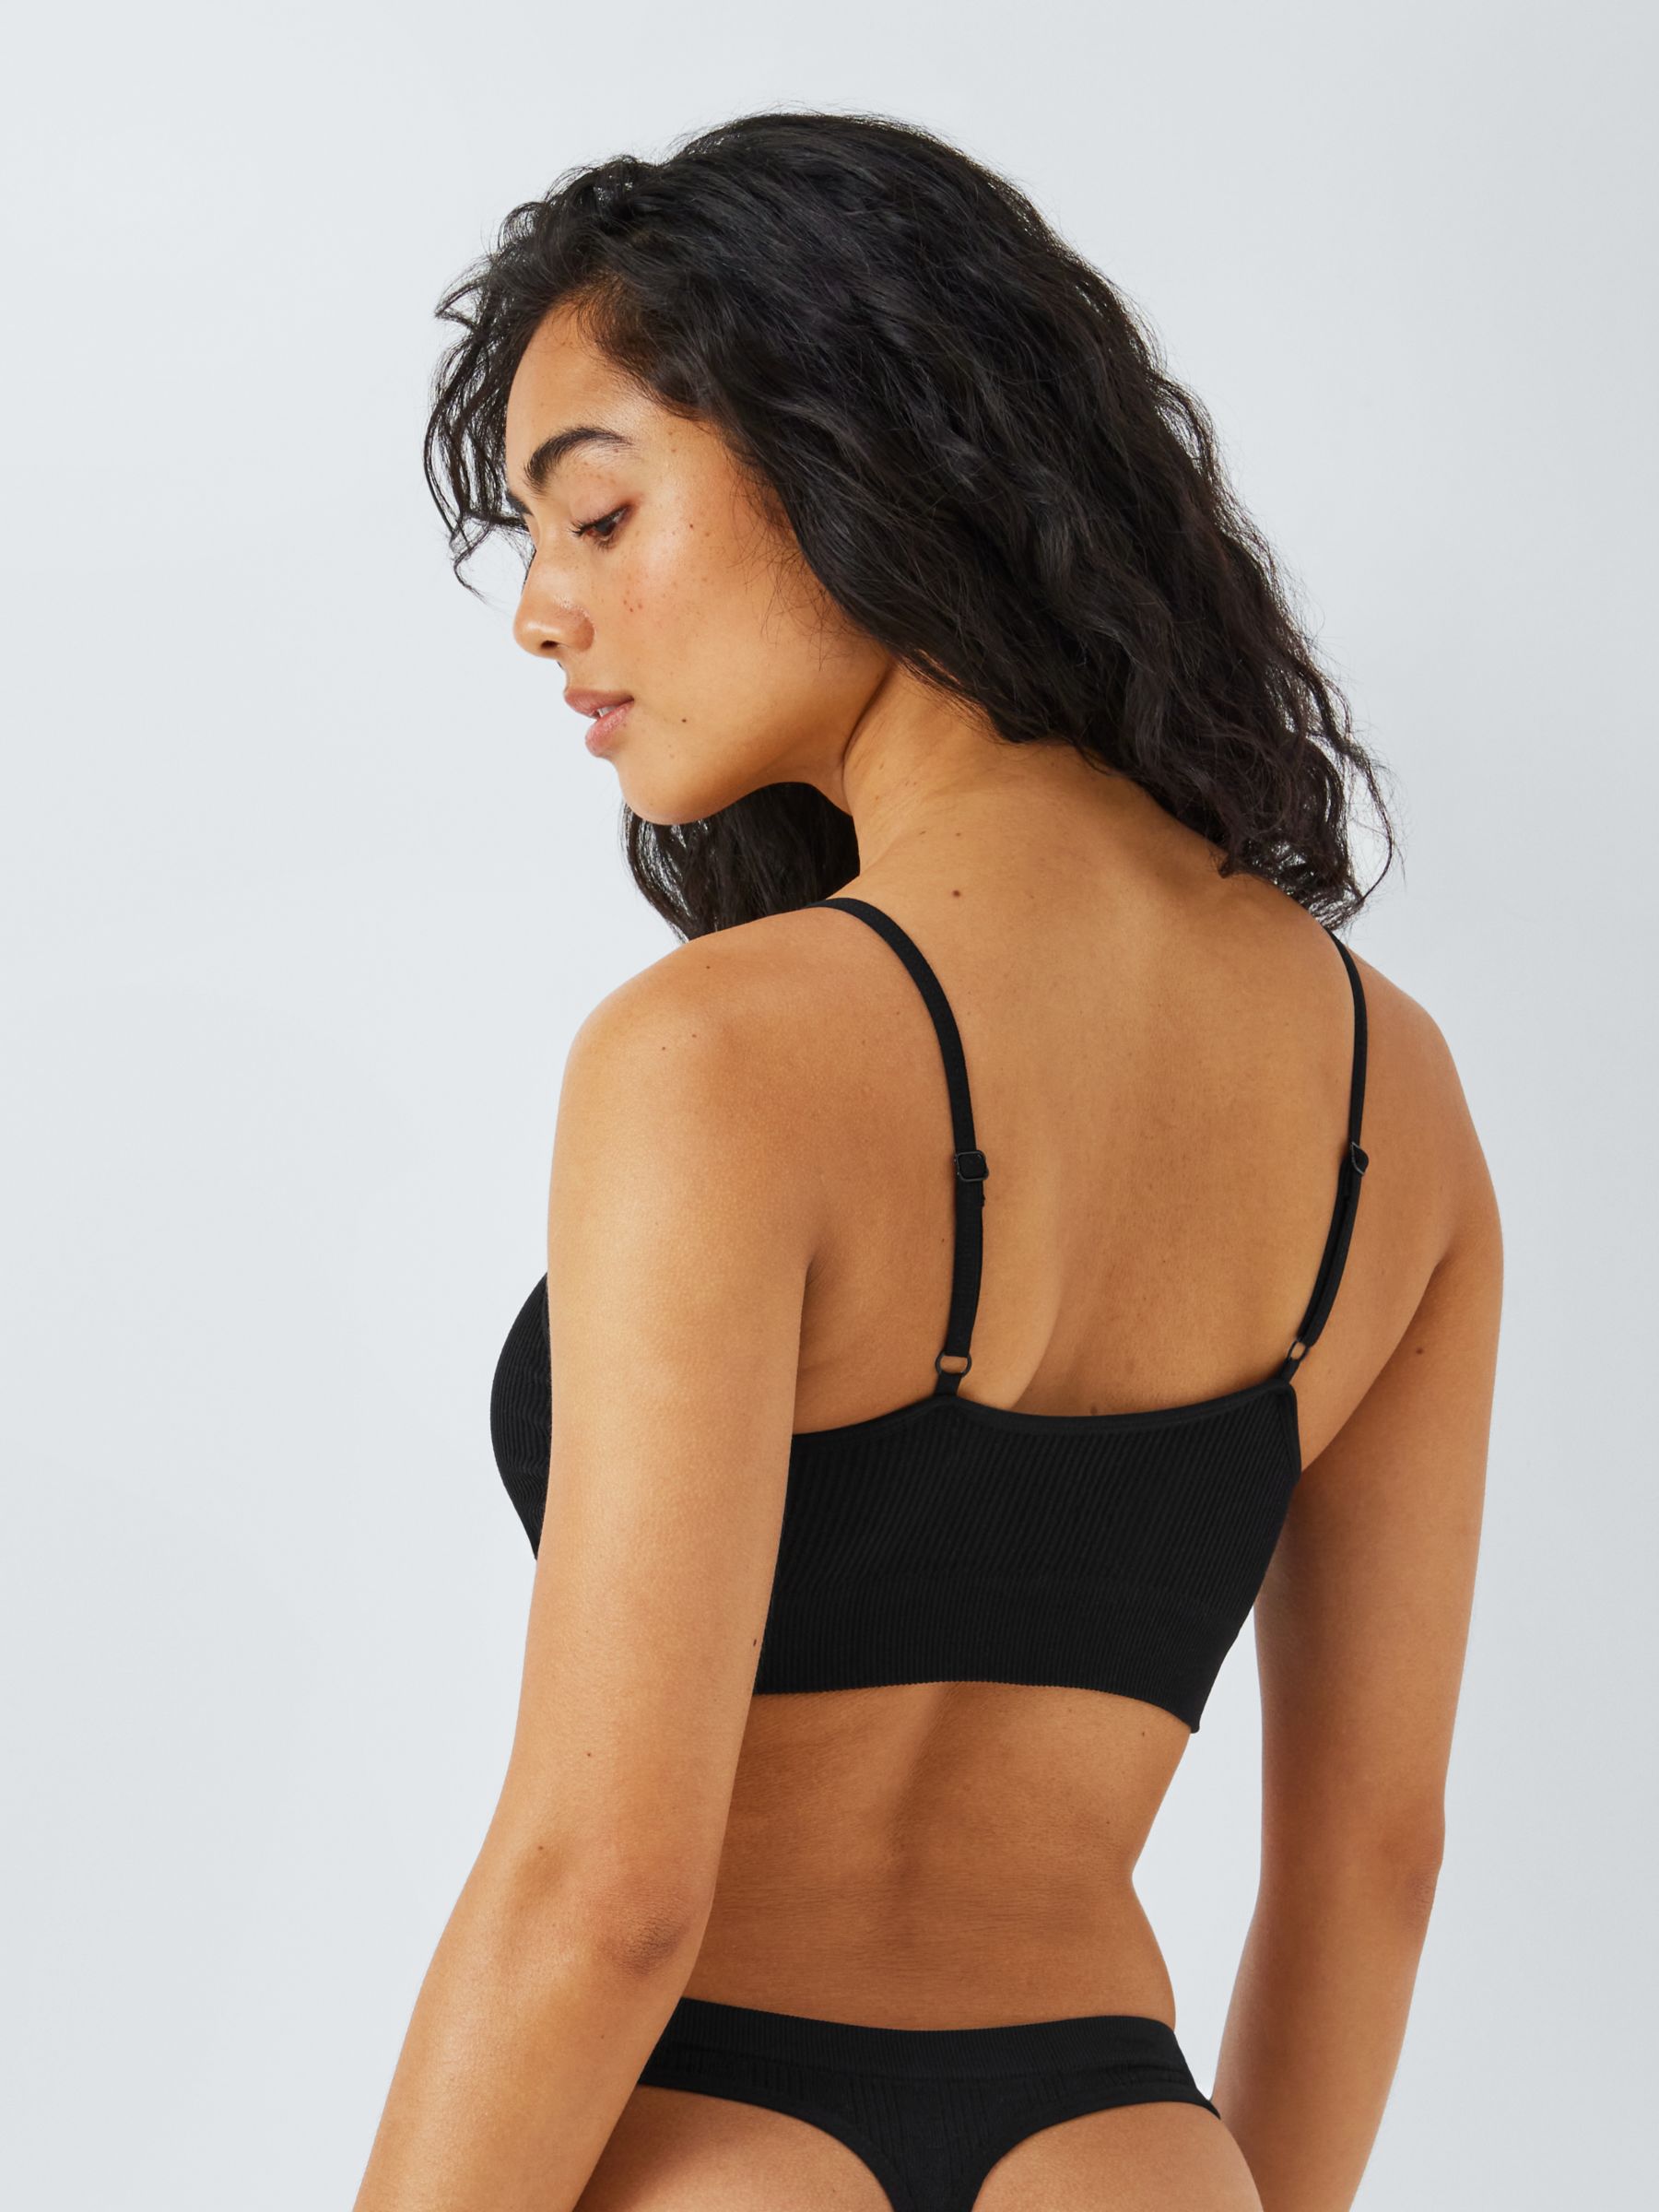 John Lewis ANYDAY Avery Non-Wired Lace Bra, Black at John Lewis